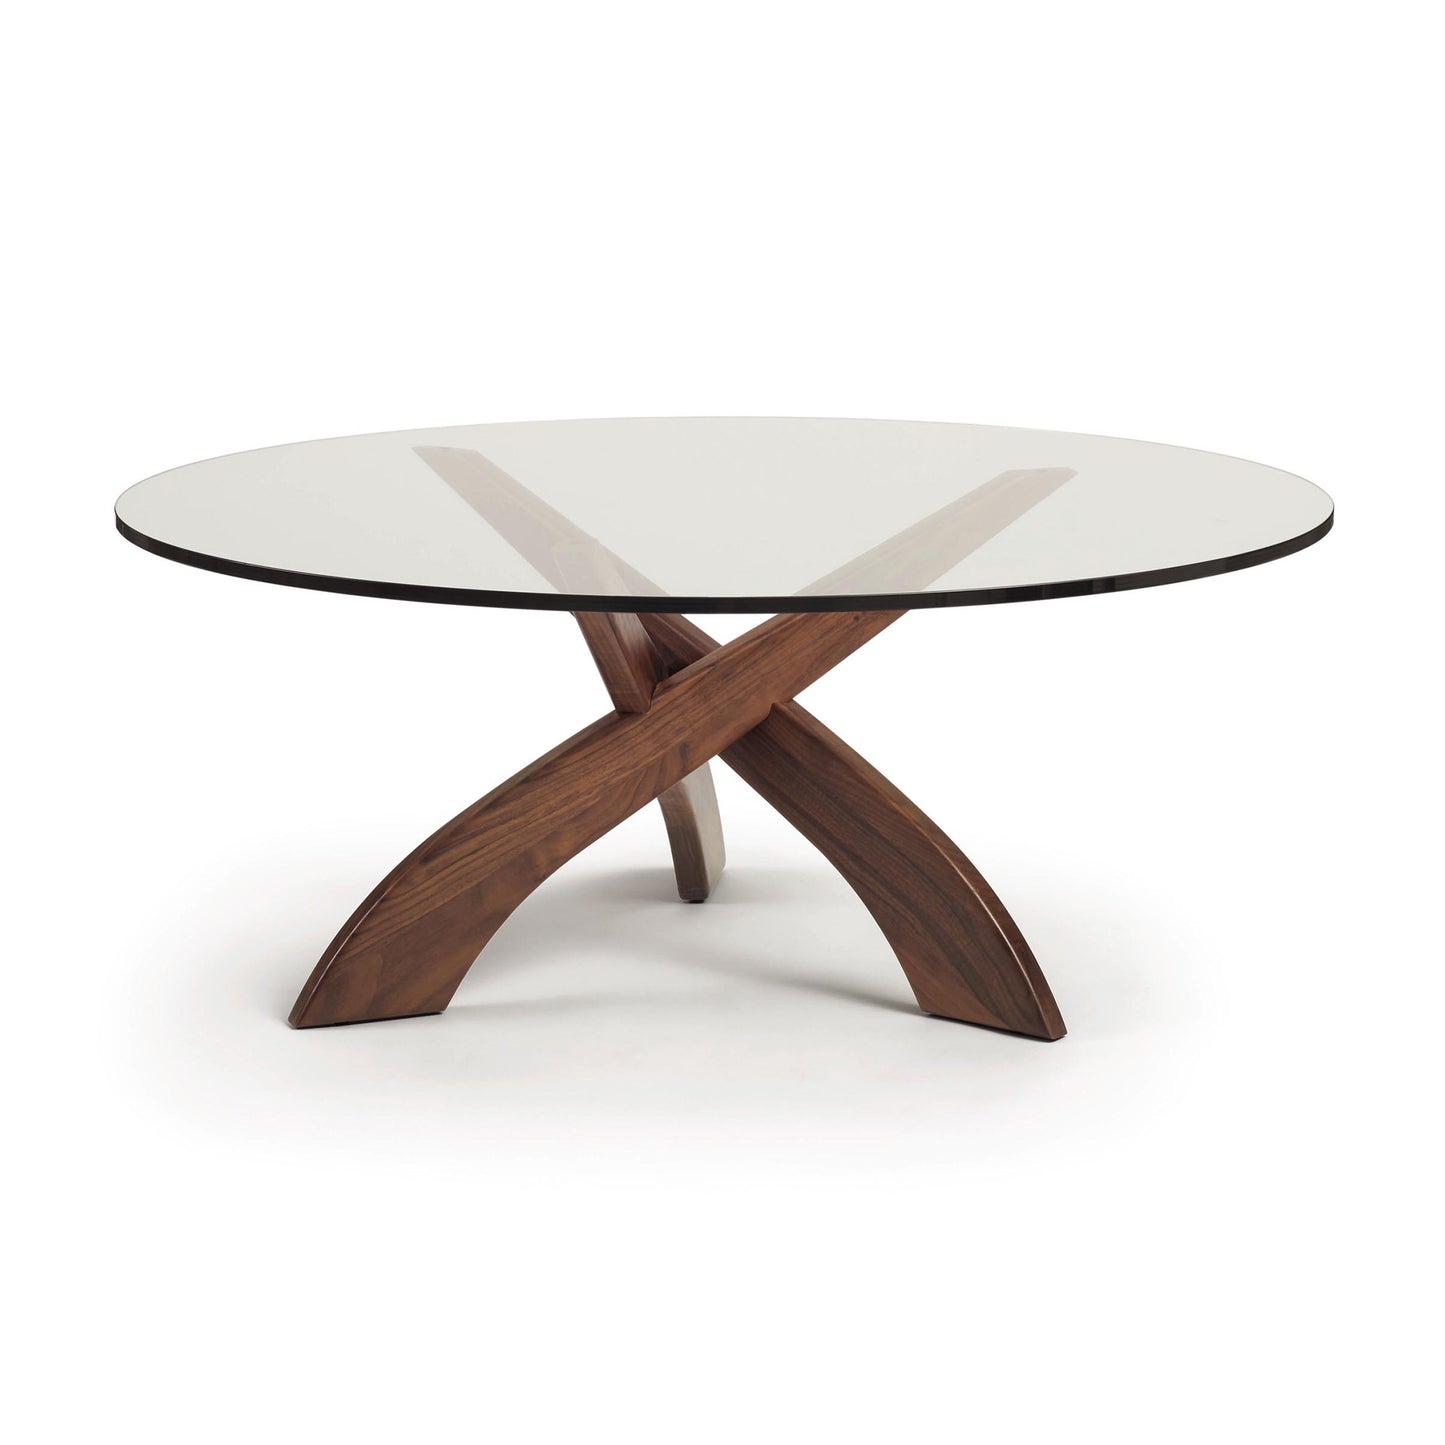 An Entwine Round Coffee Table by Copeland Furniture, with a glass top, perfect for your living room.